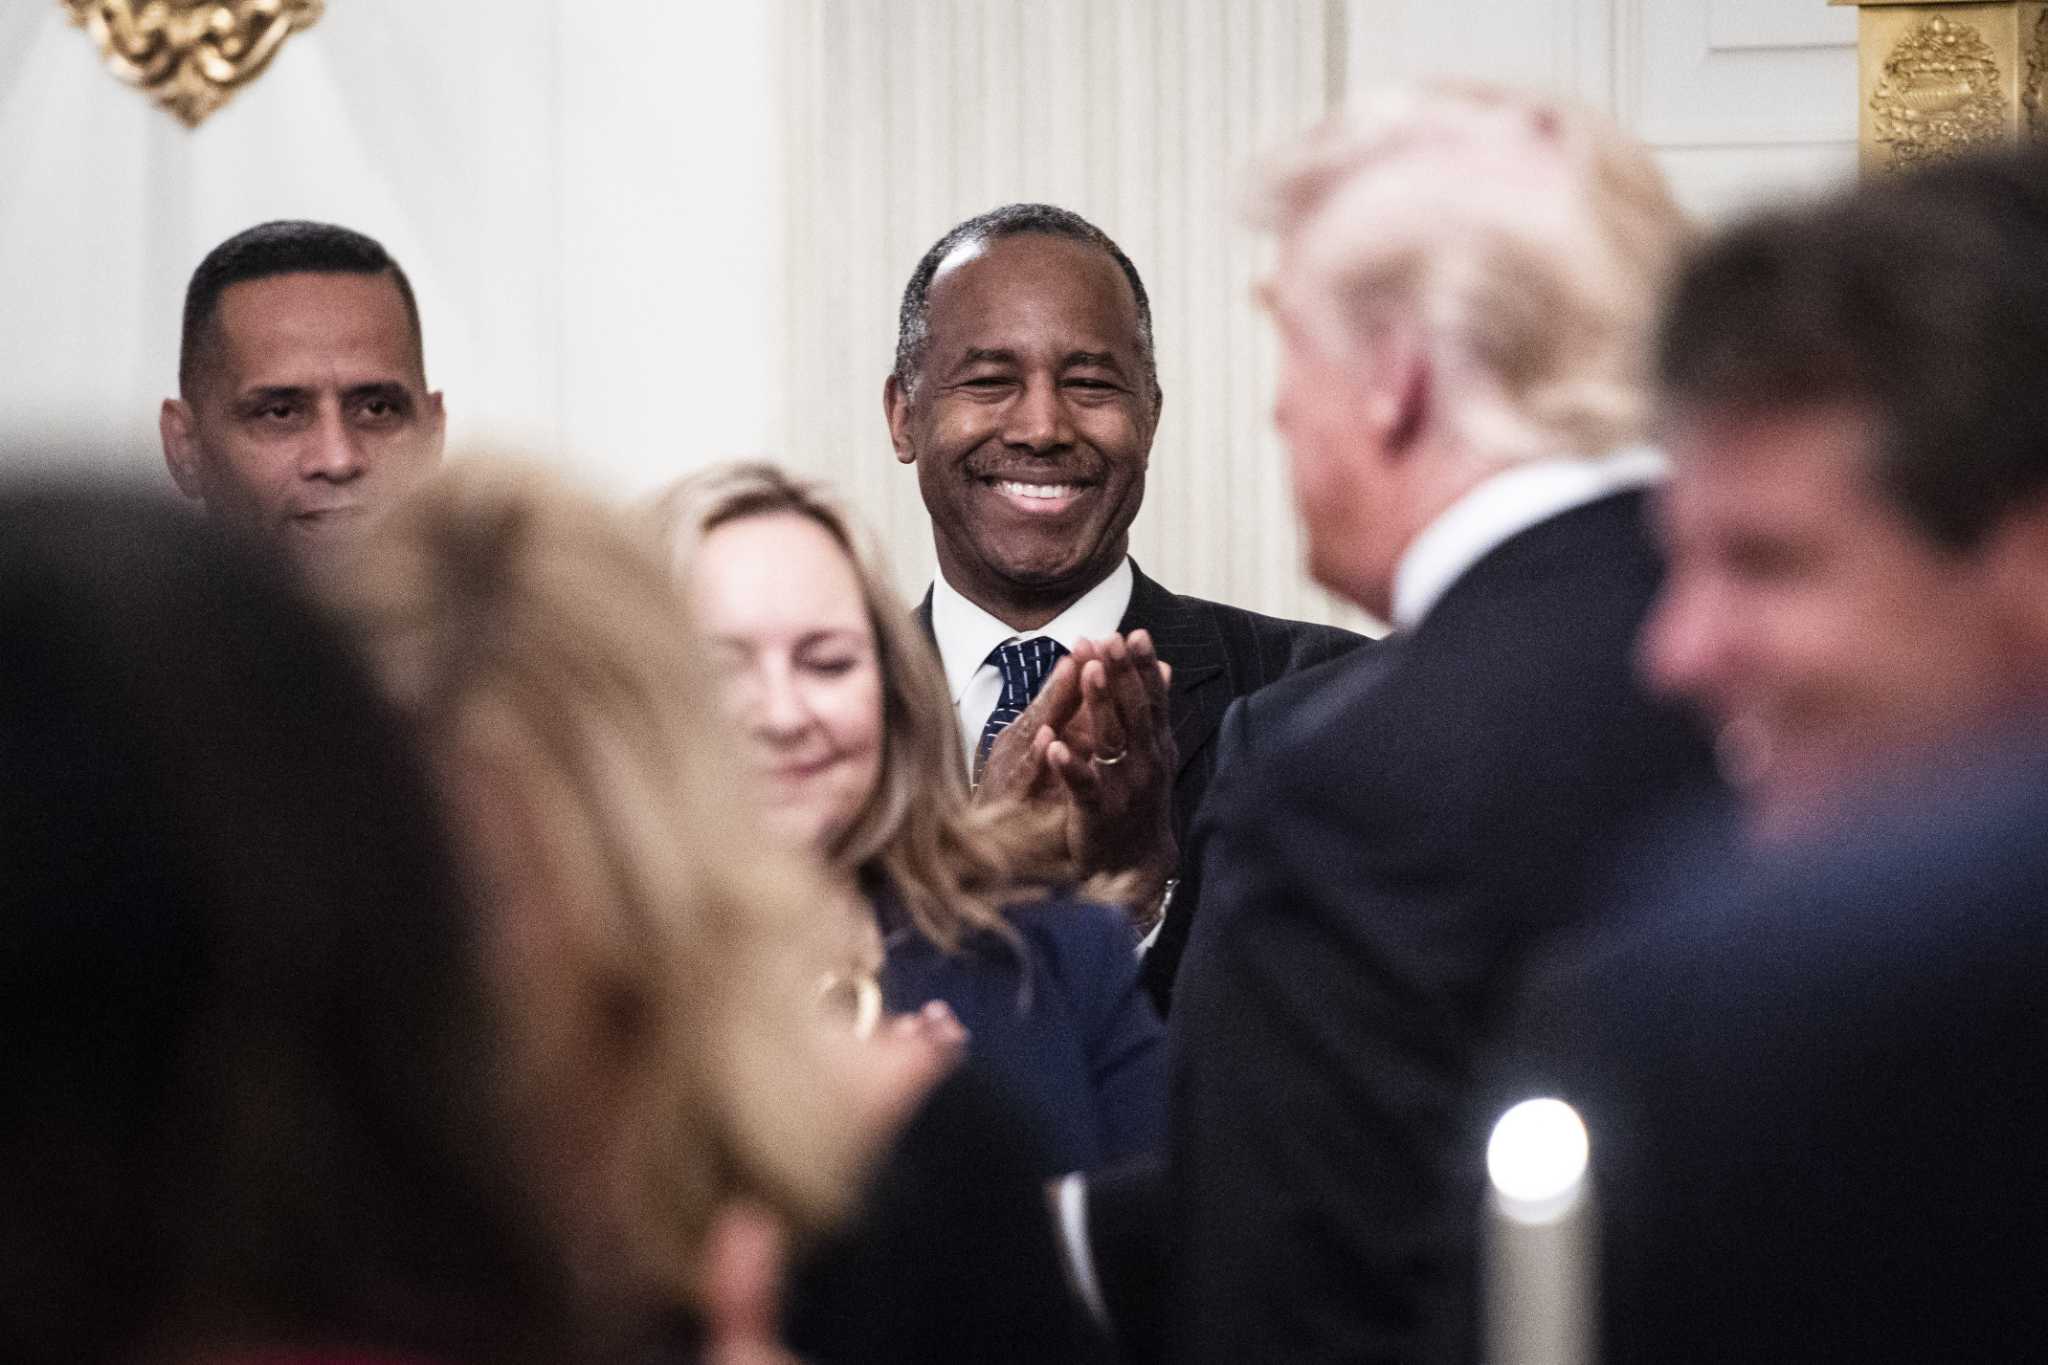 HUD says 55,000 children could be displaced under Trump plan to evict undocumented immigrants